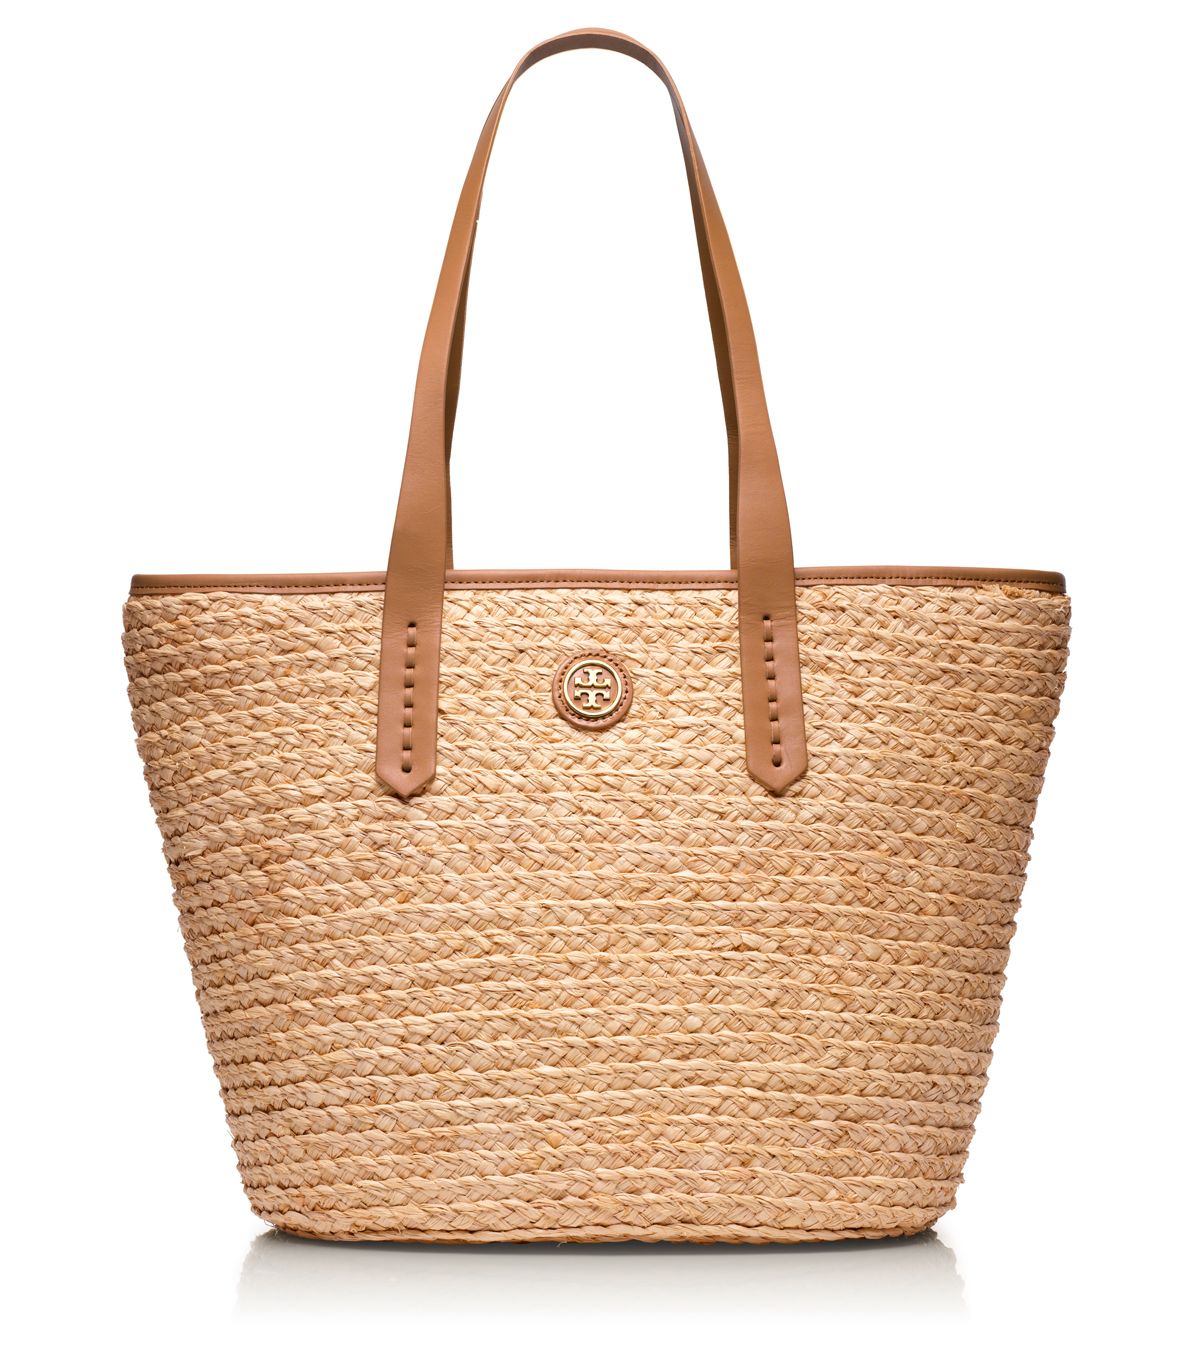 Tory burch Straw Basket Tote in Natural | Lyst